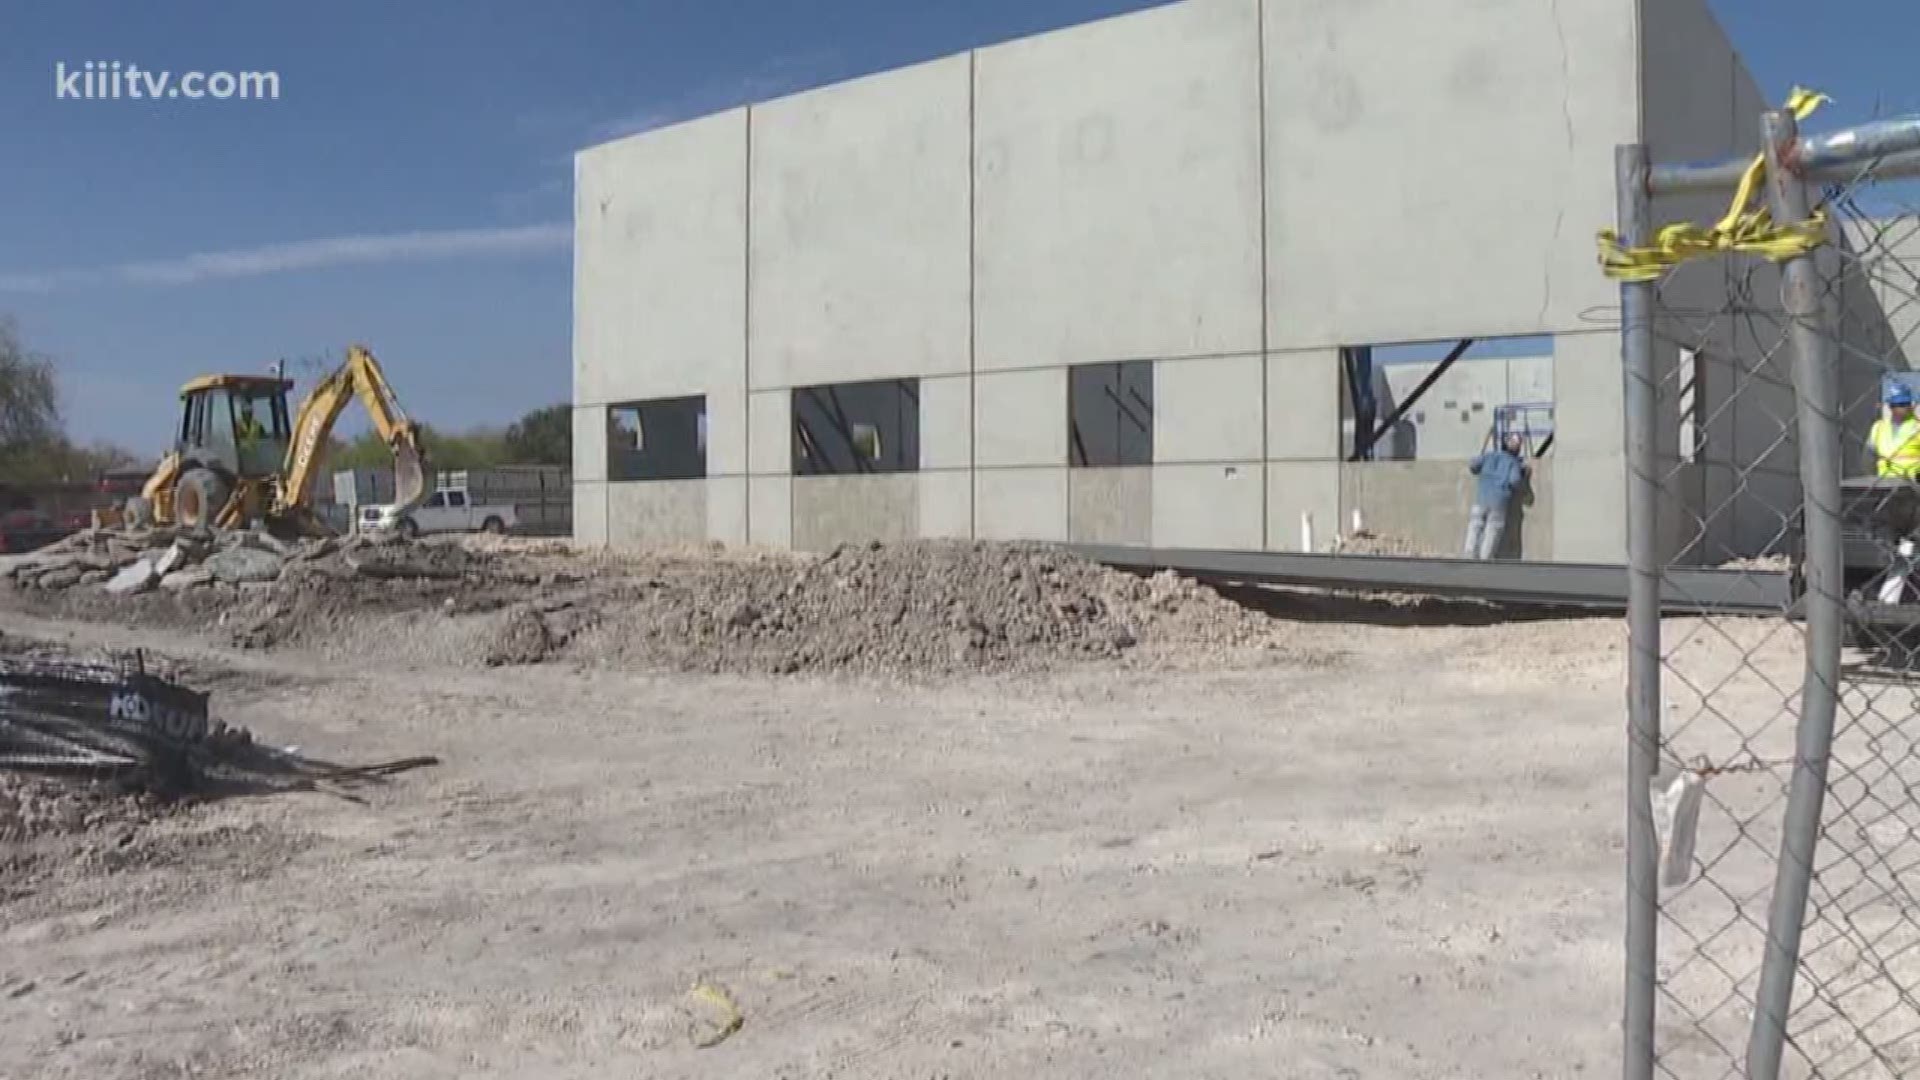 Construction is moving right along in Beeville on a new county jail that will be located right next to the current sheriff's office and jail.